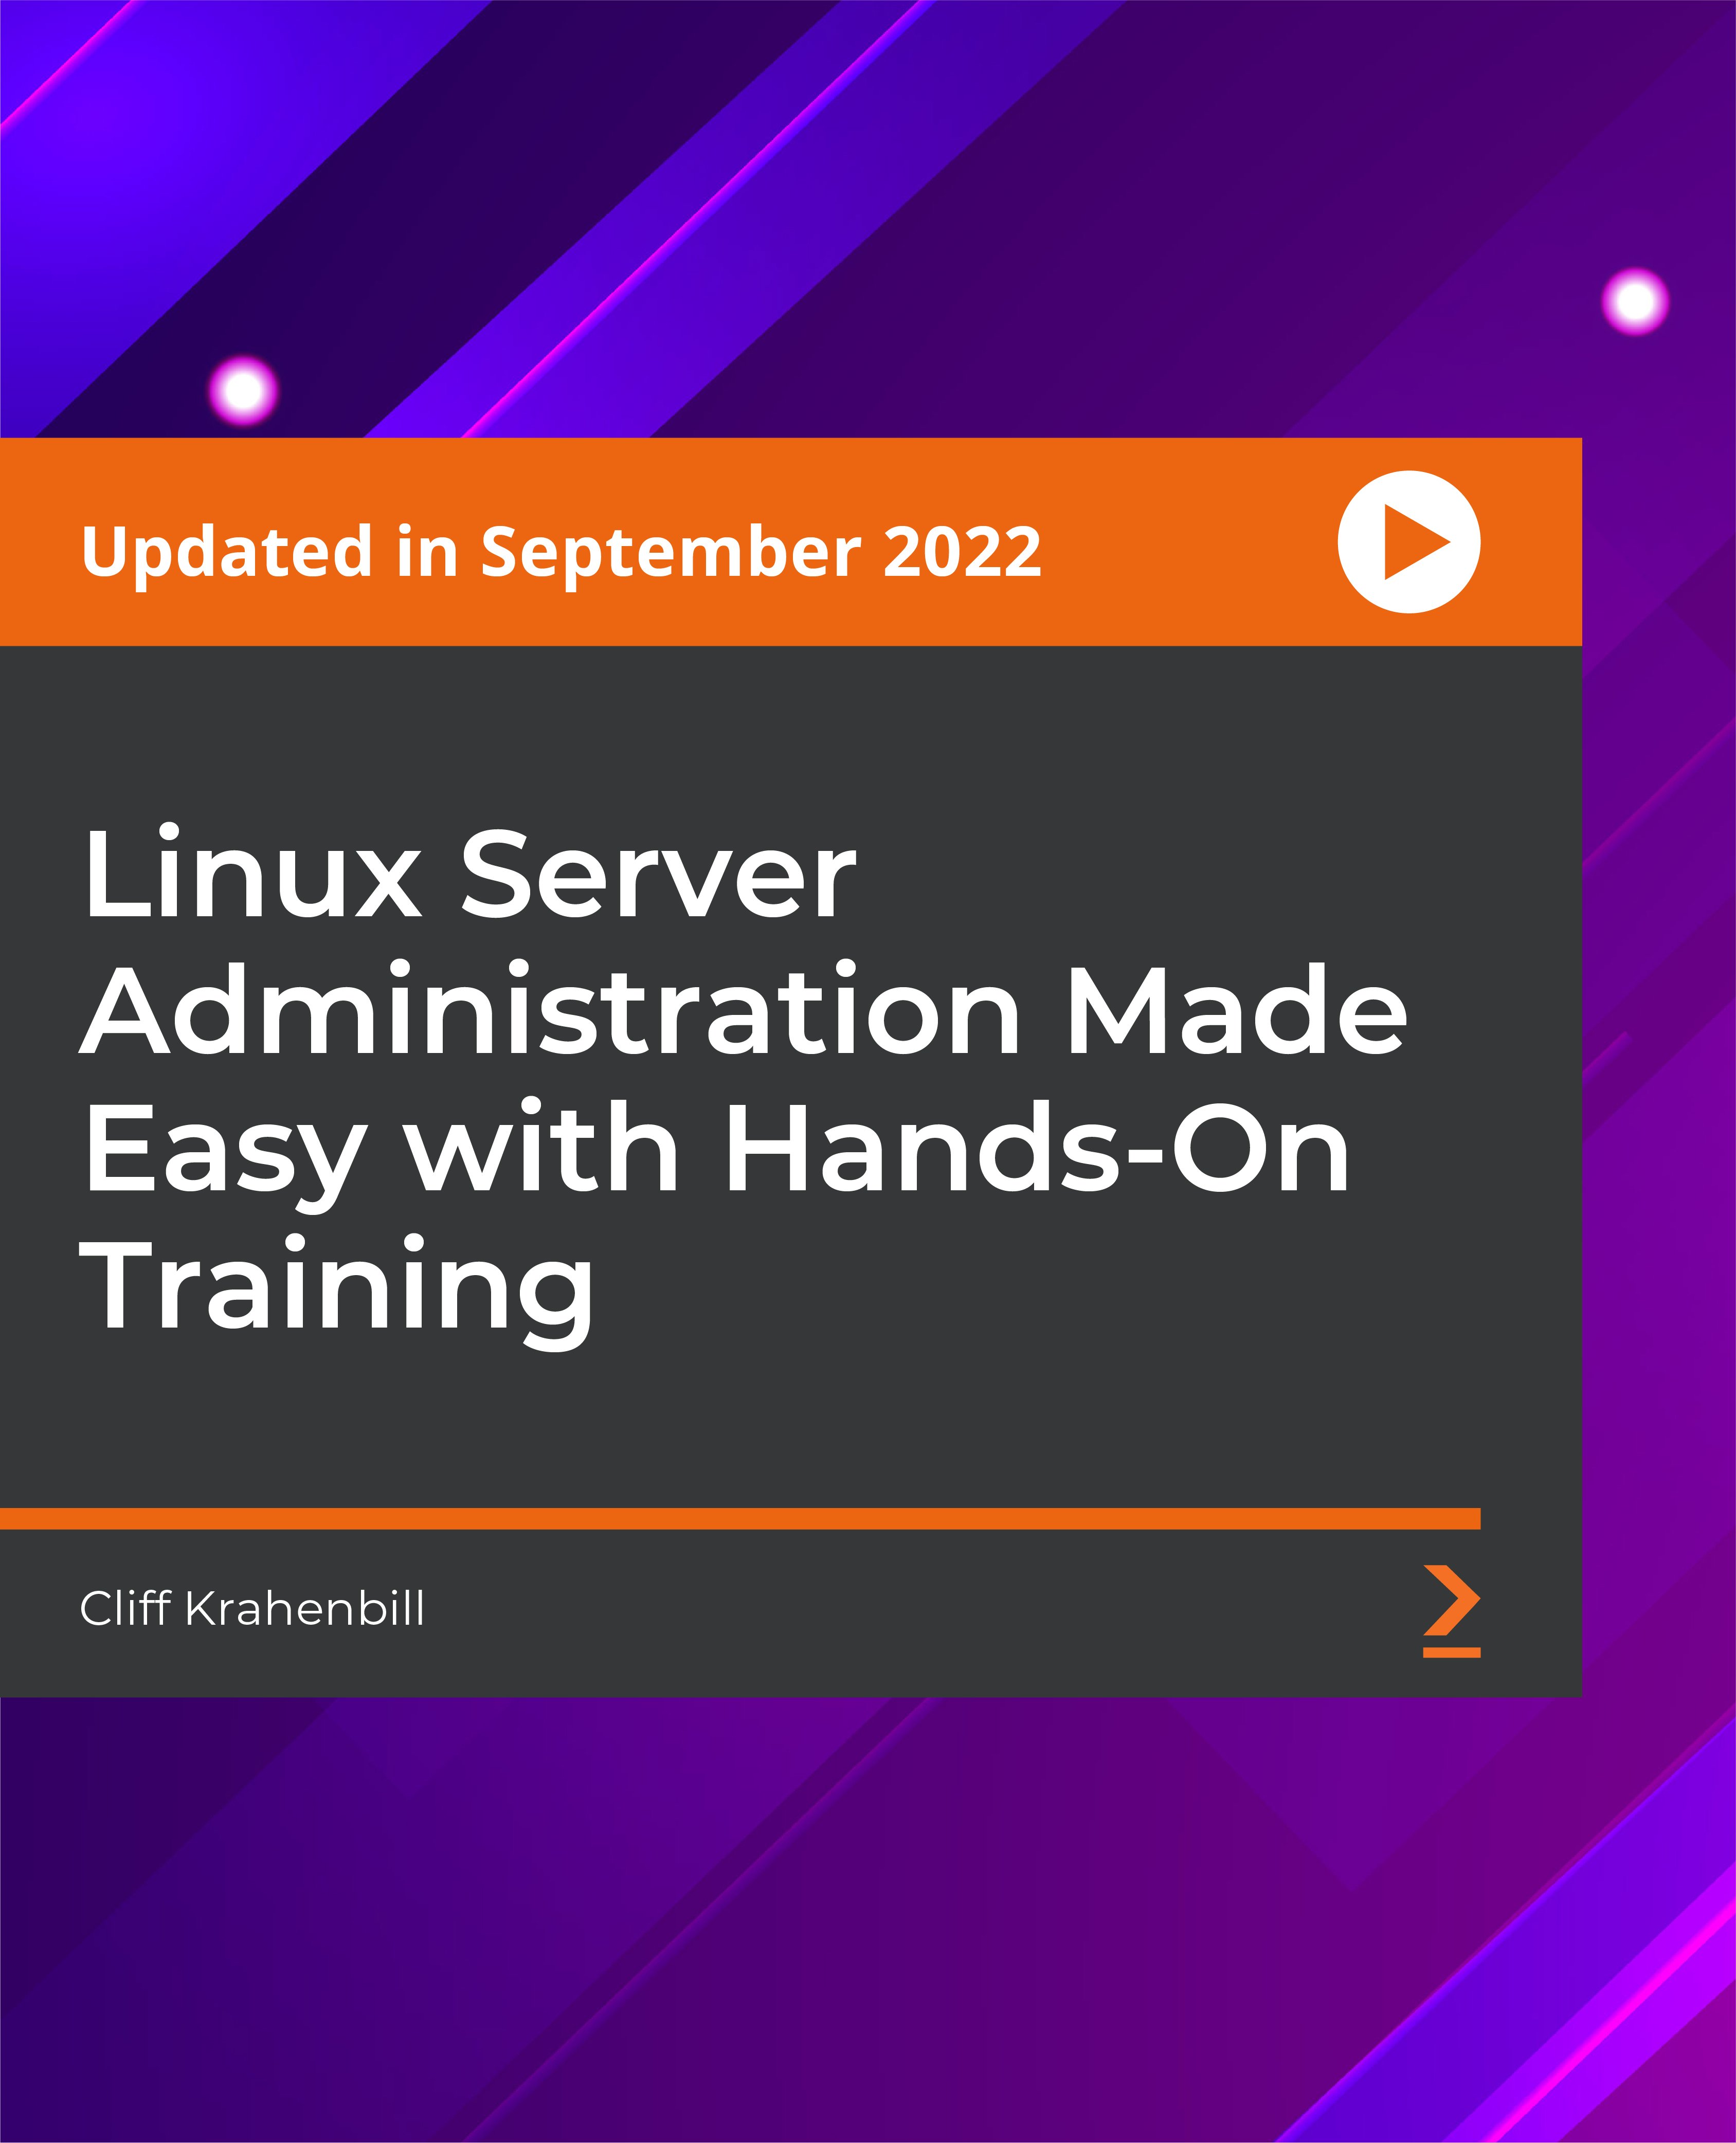 Linux Server Administration Made Easy with Hands-On Training